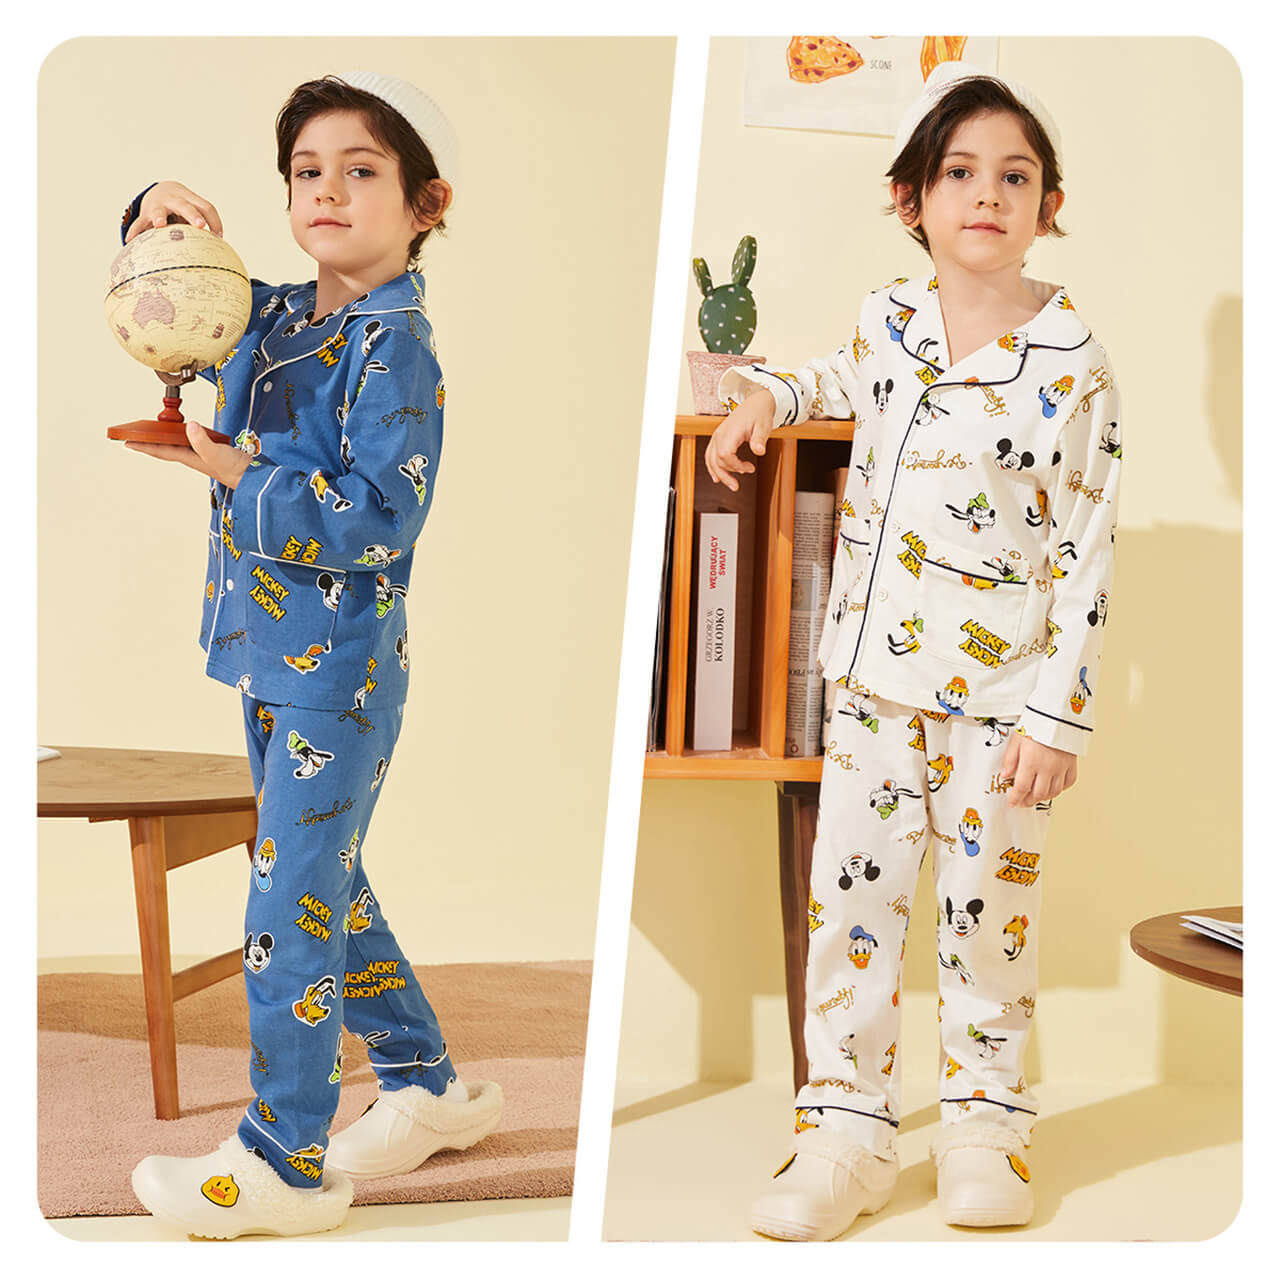 Things to check when buying sleepwear for kids